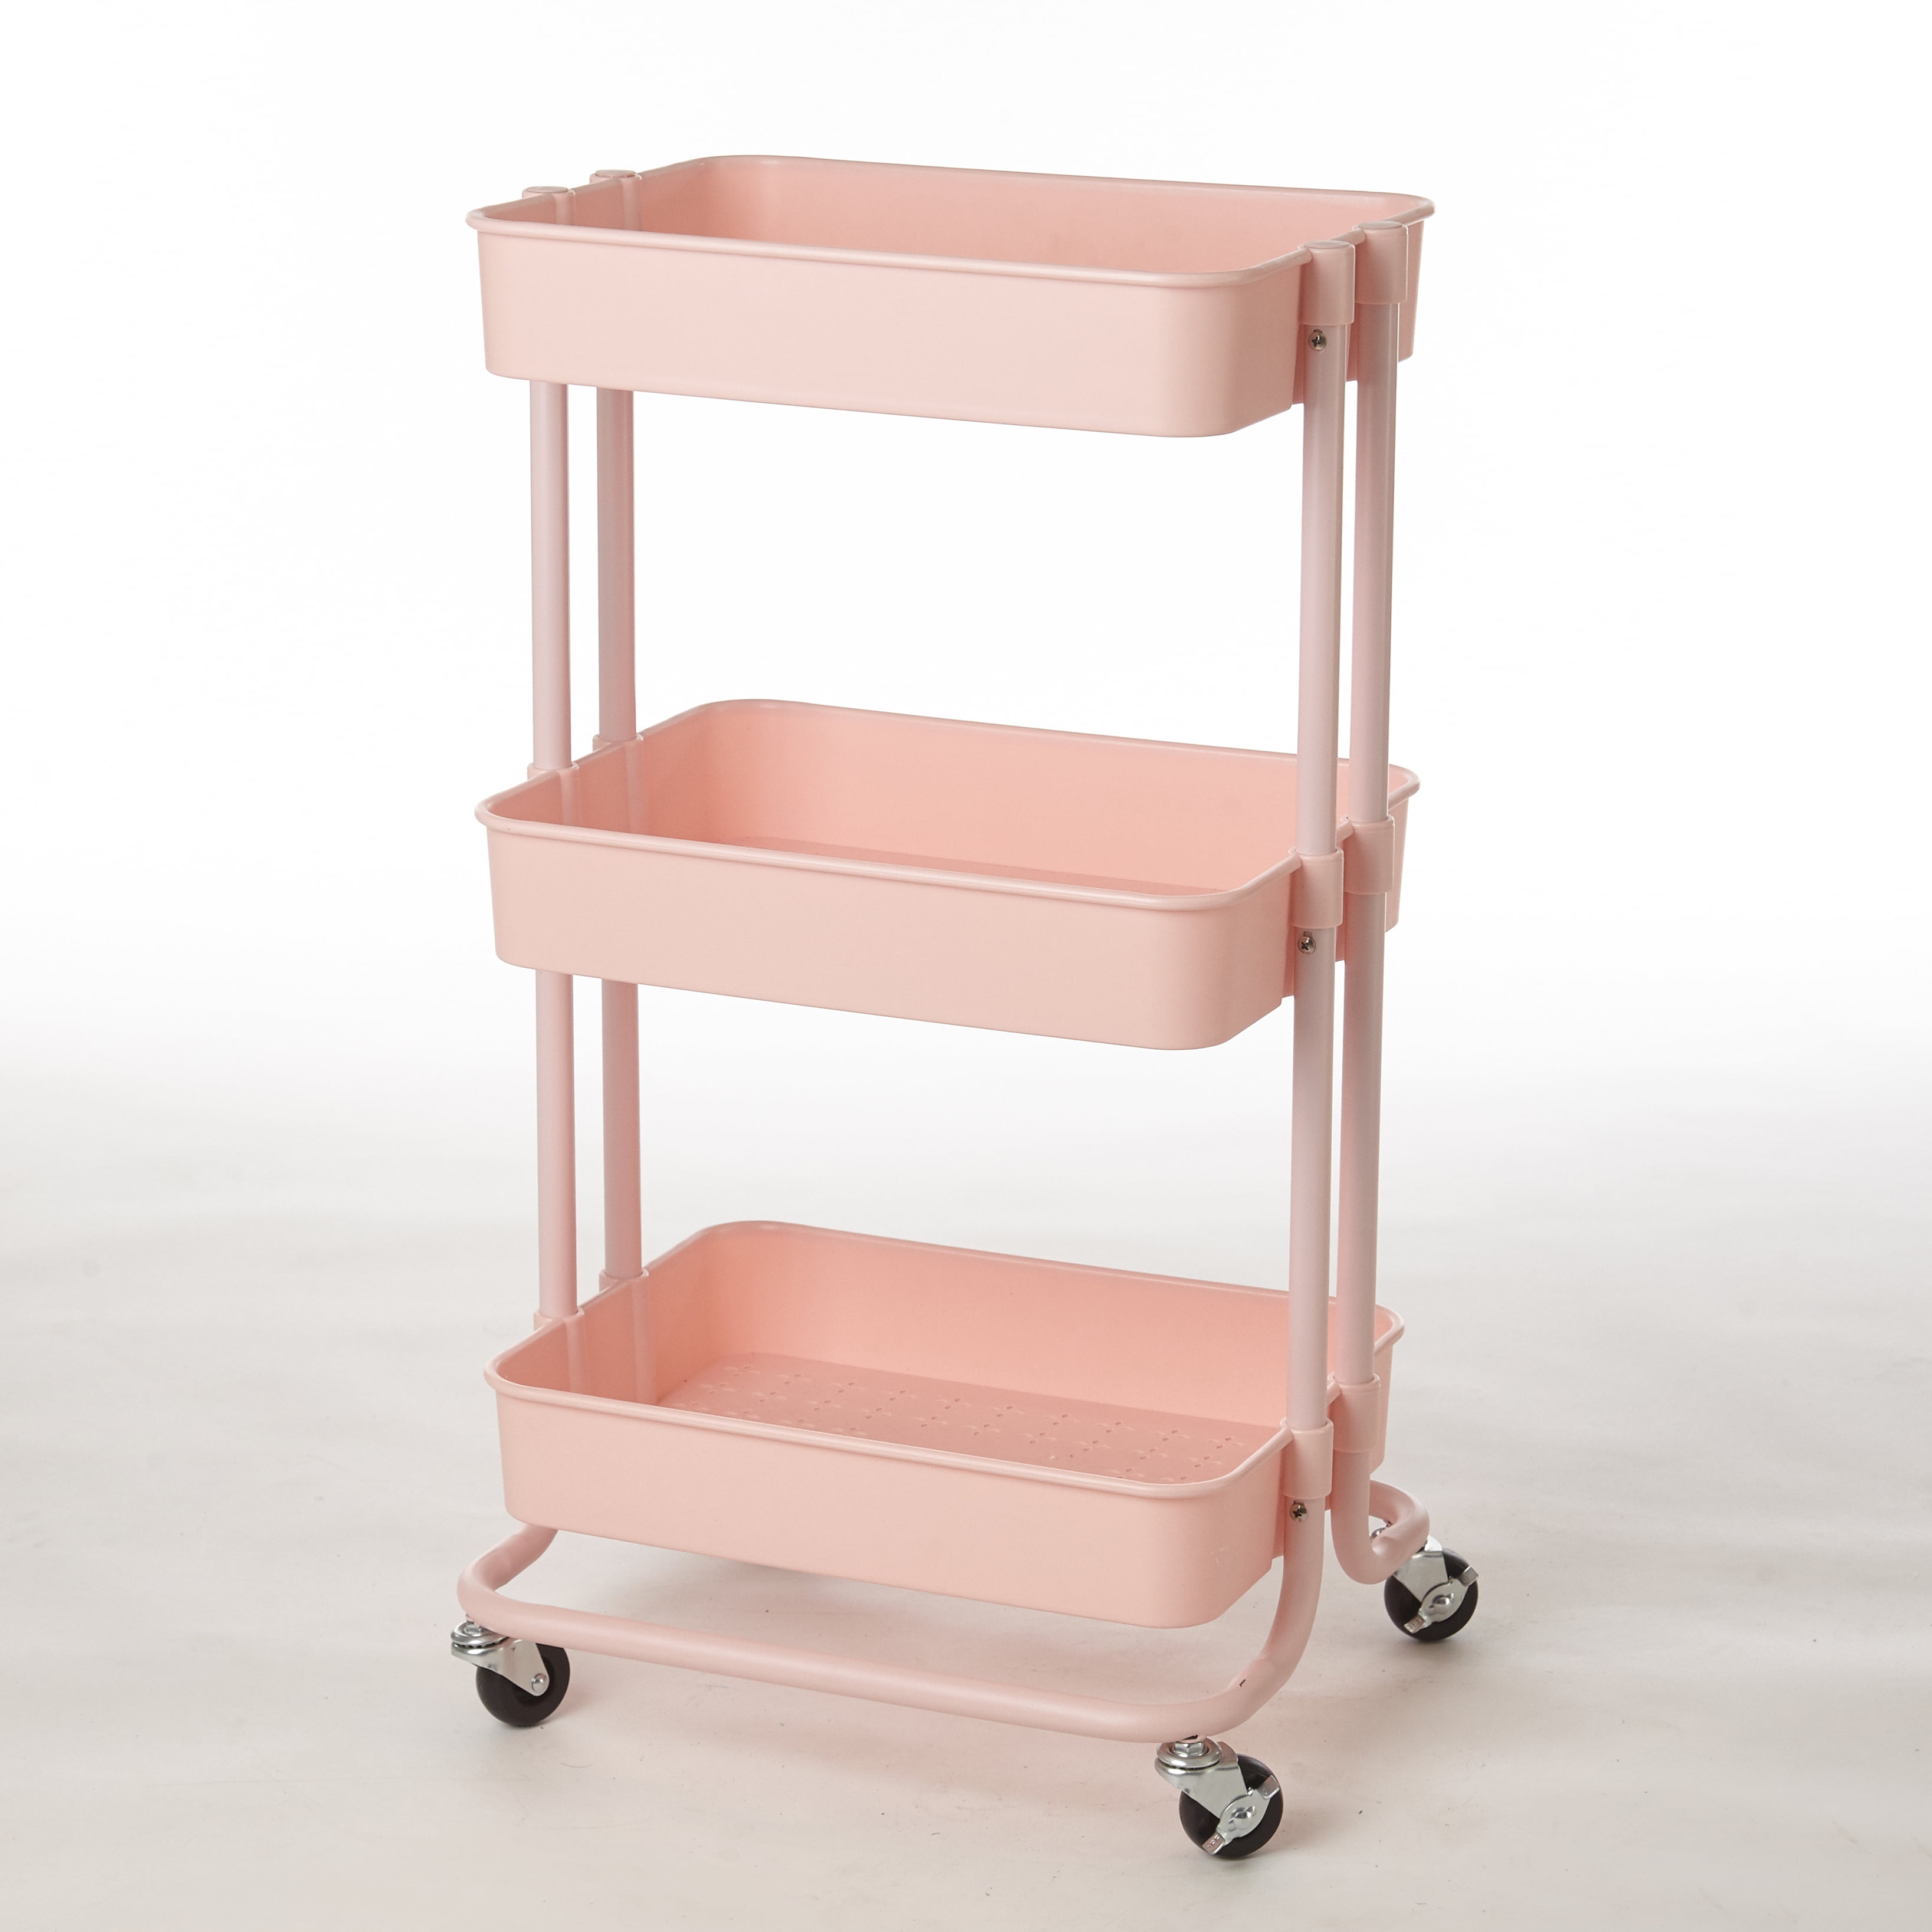 Details about   4Tier Rolling Utility Cart Basket Kitchen Bathroom Storage Rack Stand Tool Y801C 